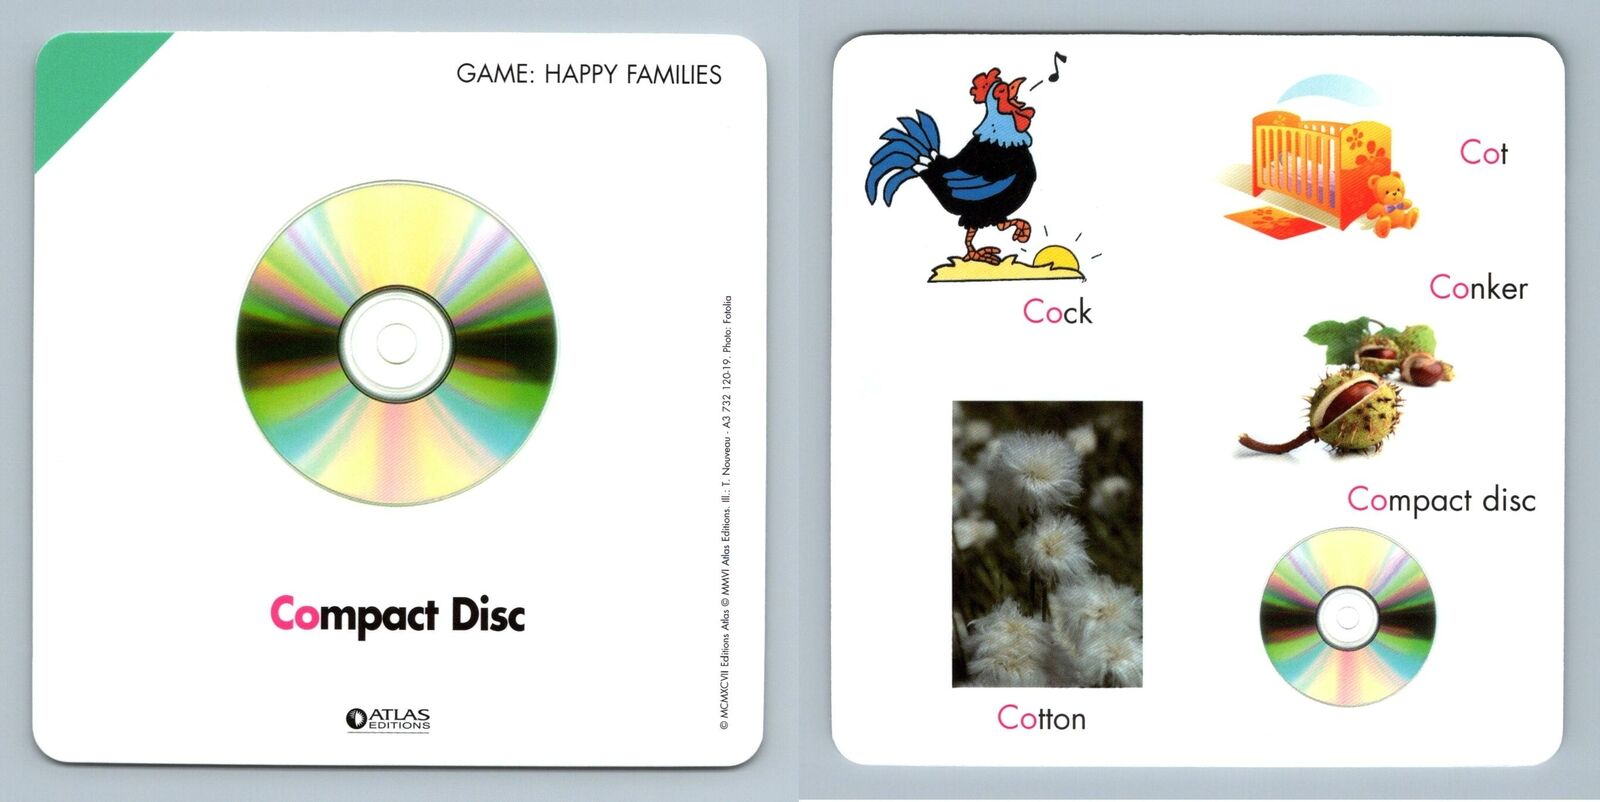 Compact Disc - Happy Families - Atlas Editions Play & Learn Flash Card